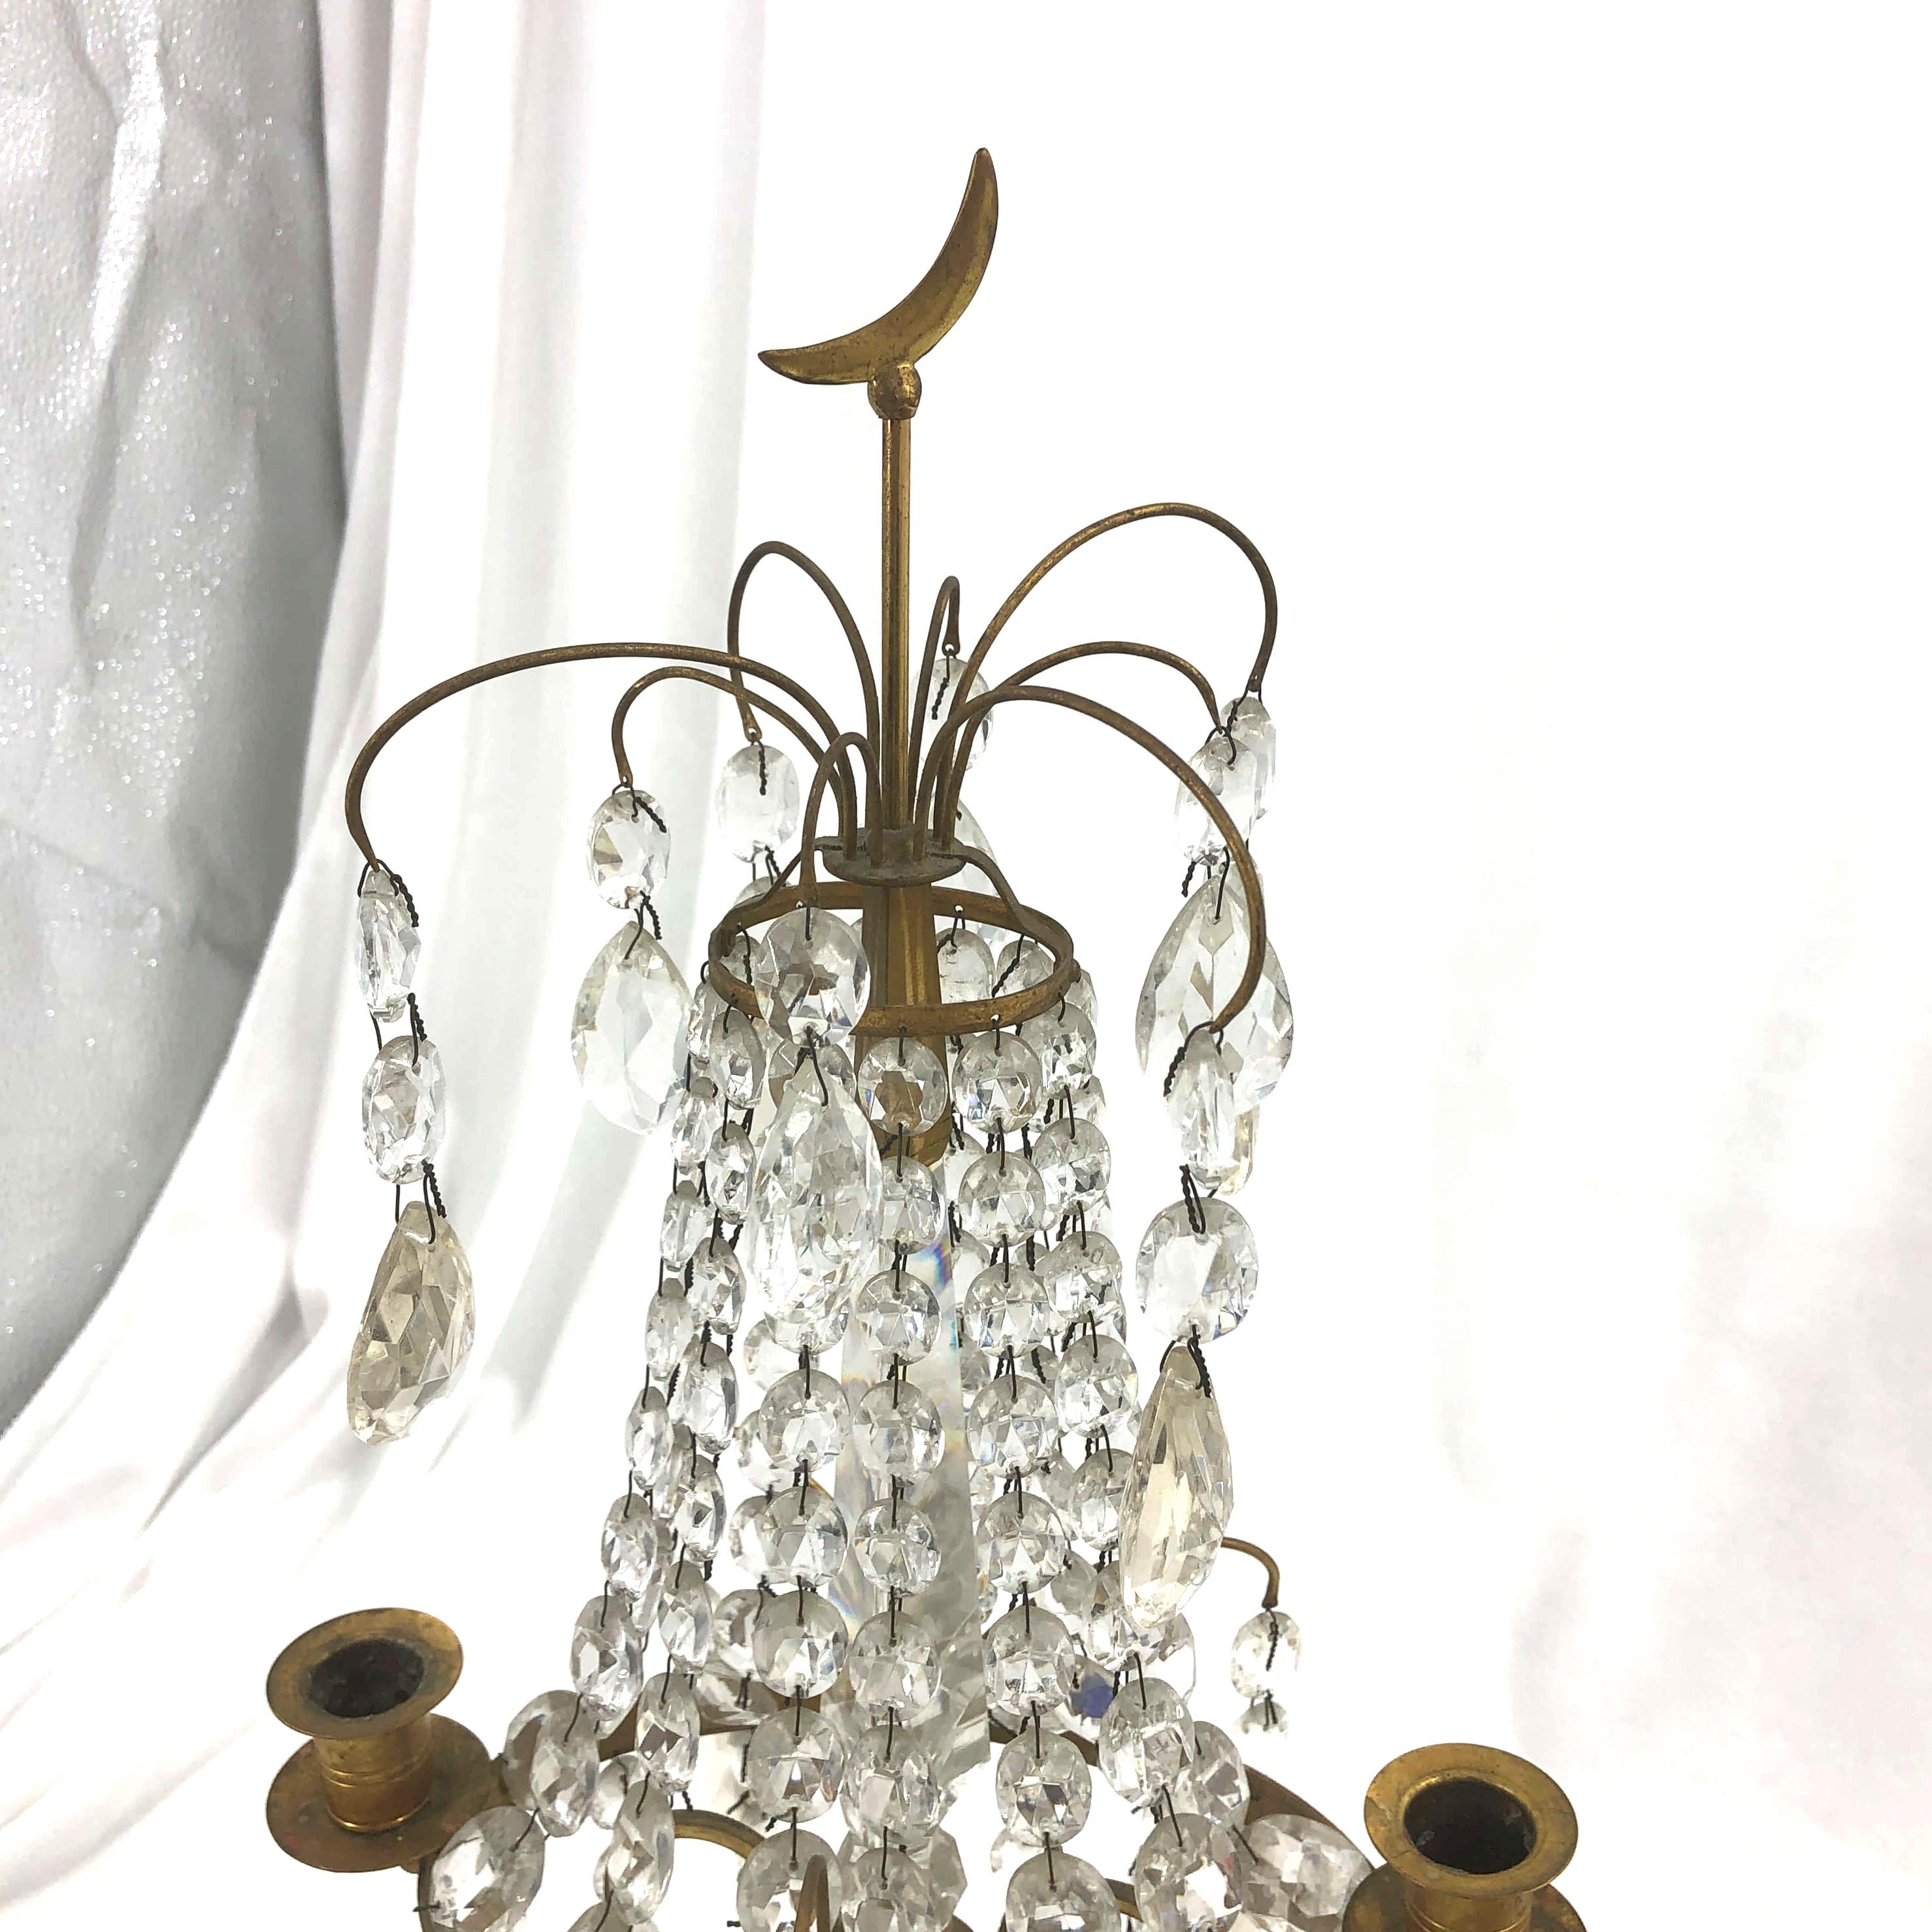 A pair of Baltic crystal, bronze, cobalt glass and marble two-light candelabra.